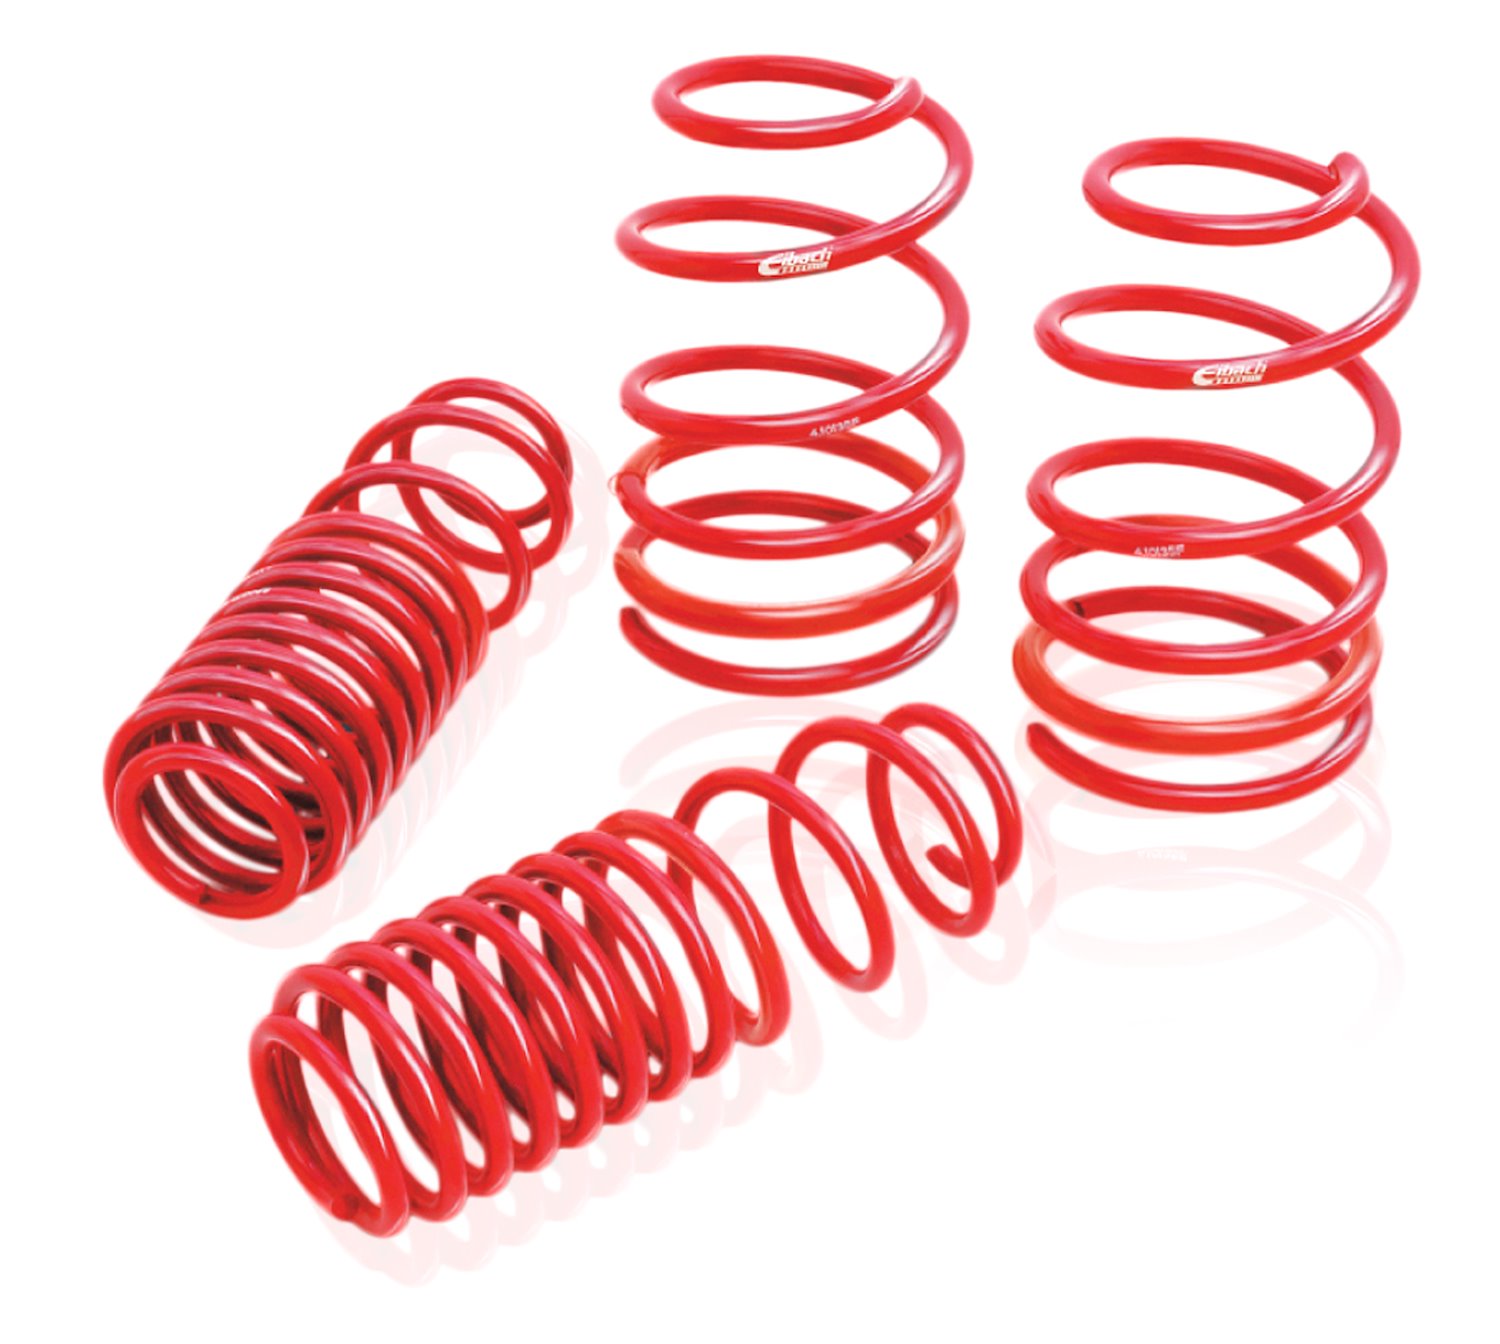 4.0782 Sportline Extreme Lowering Springs 1990-99 Toyota Celica - 1.5" Front/Rear Drop